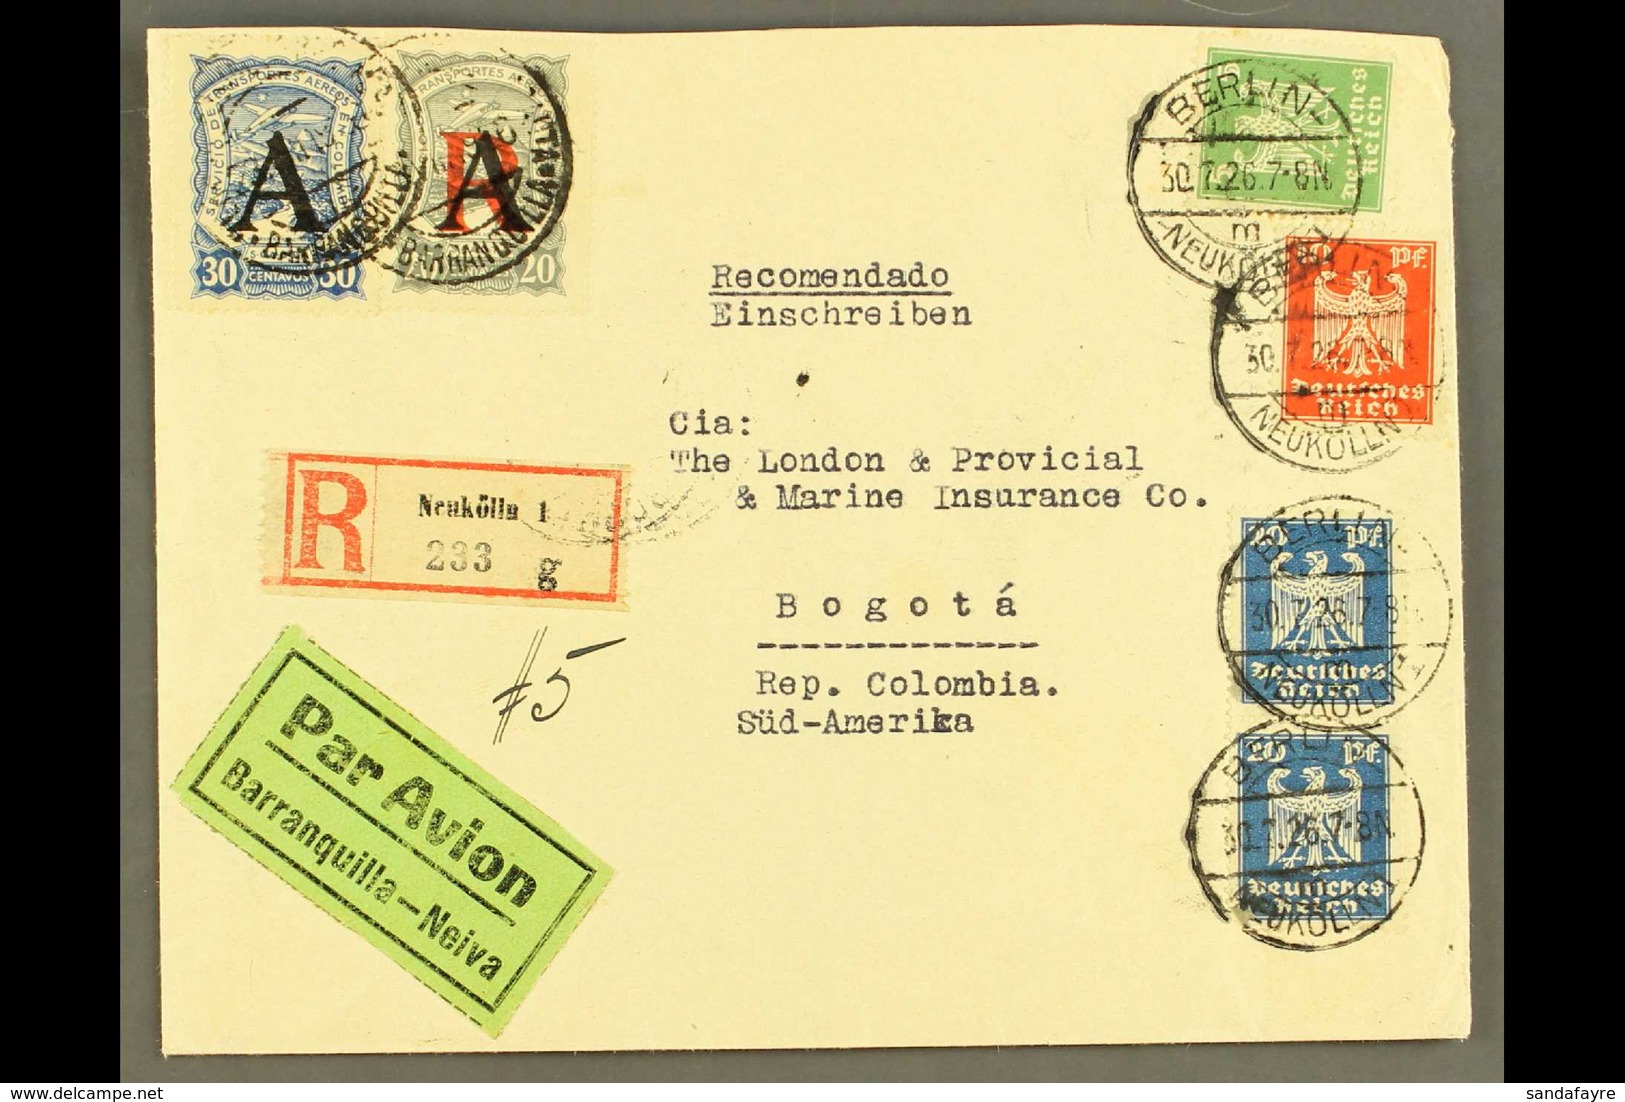 SCADTA 1926 (30 July) Registered Cover From Germany Addressed To Bogota, Bearing Germany 5pf, 10pf & 20pf Pair Tied By " - Colombia